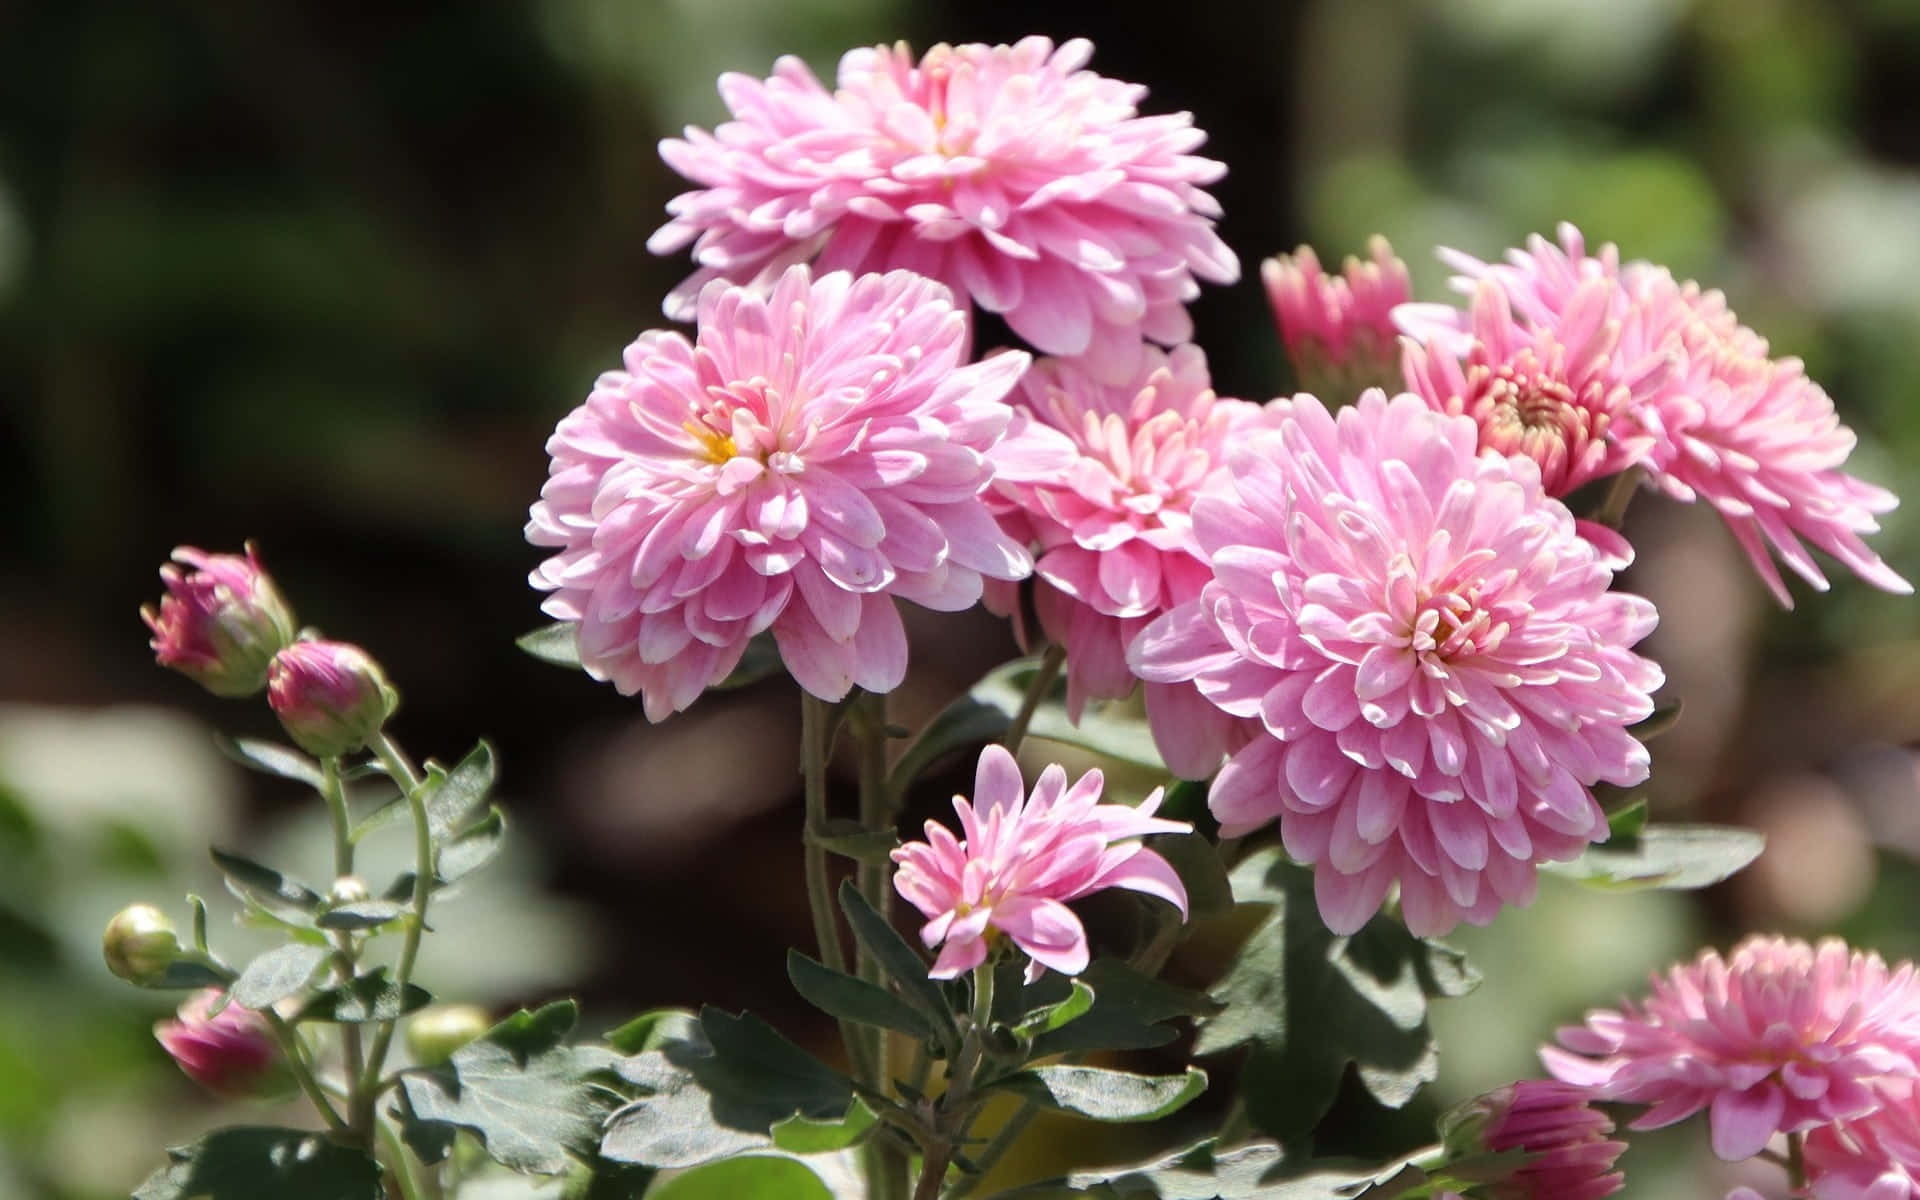 Caption: Blooming Pink Chrysanthemums in Full Glory Wallpaper